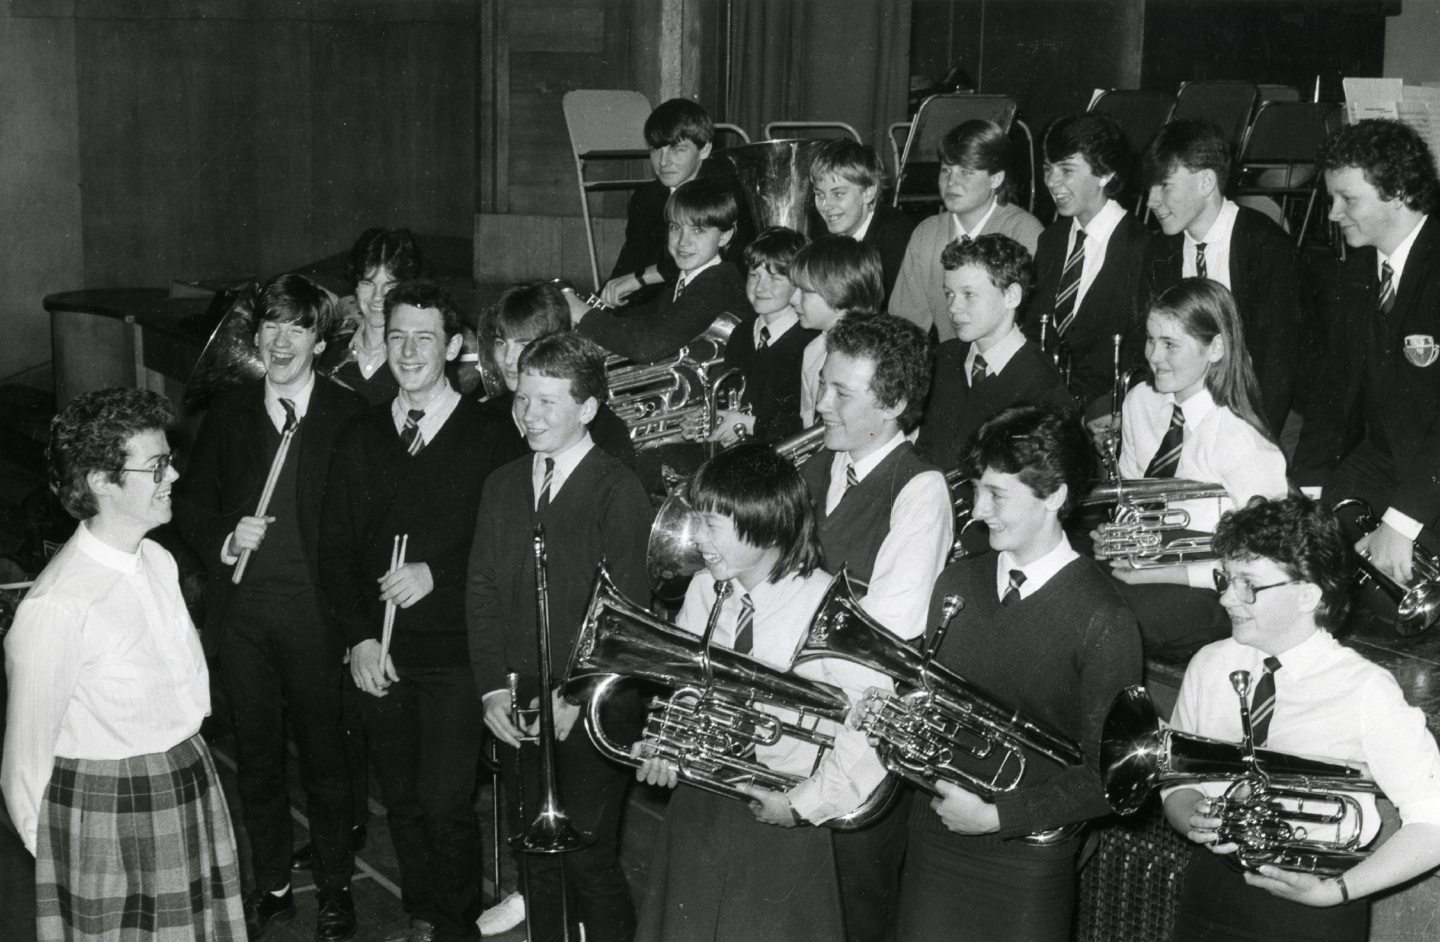 Harlaw Academy Brass Band smiling 